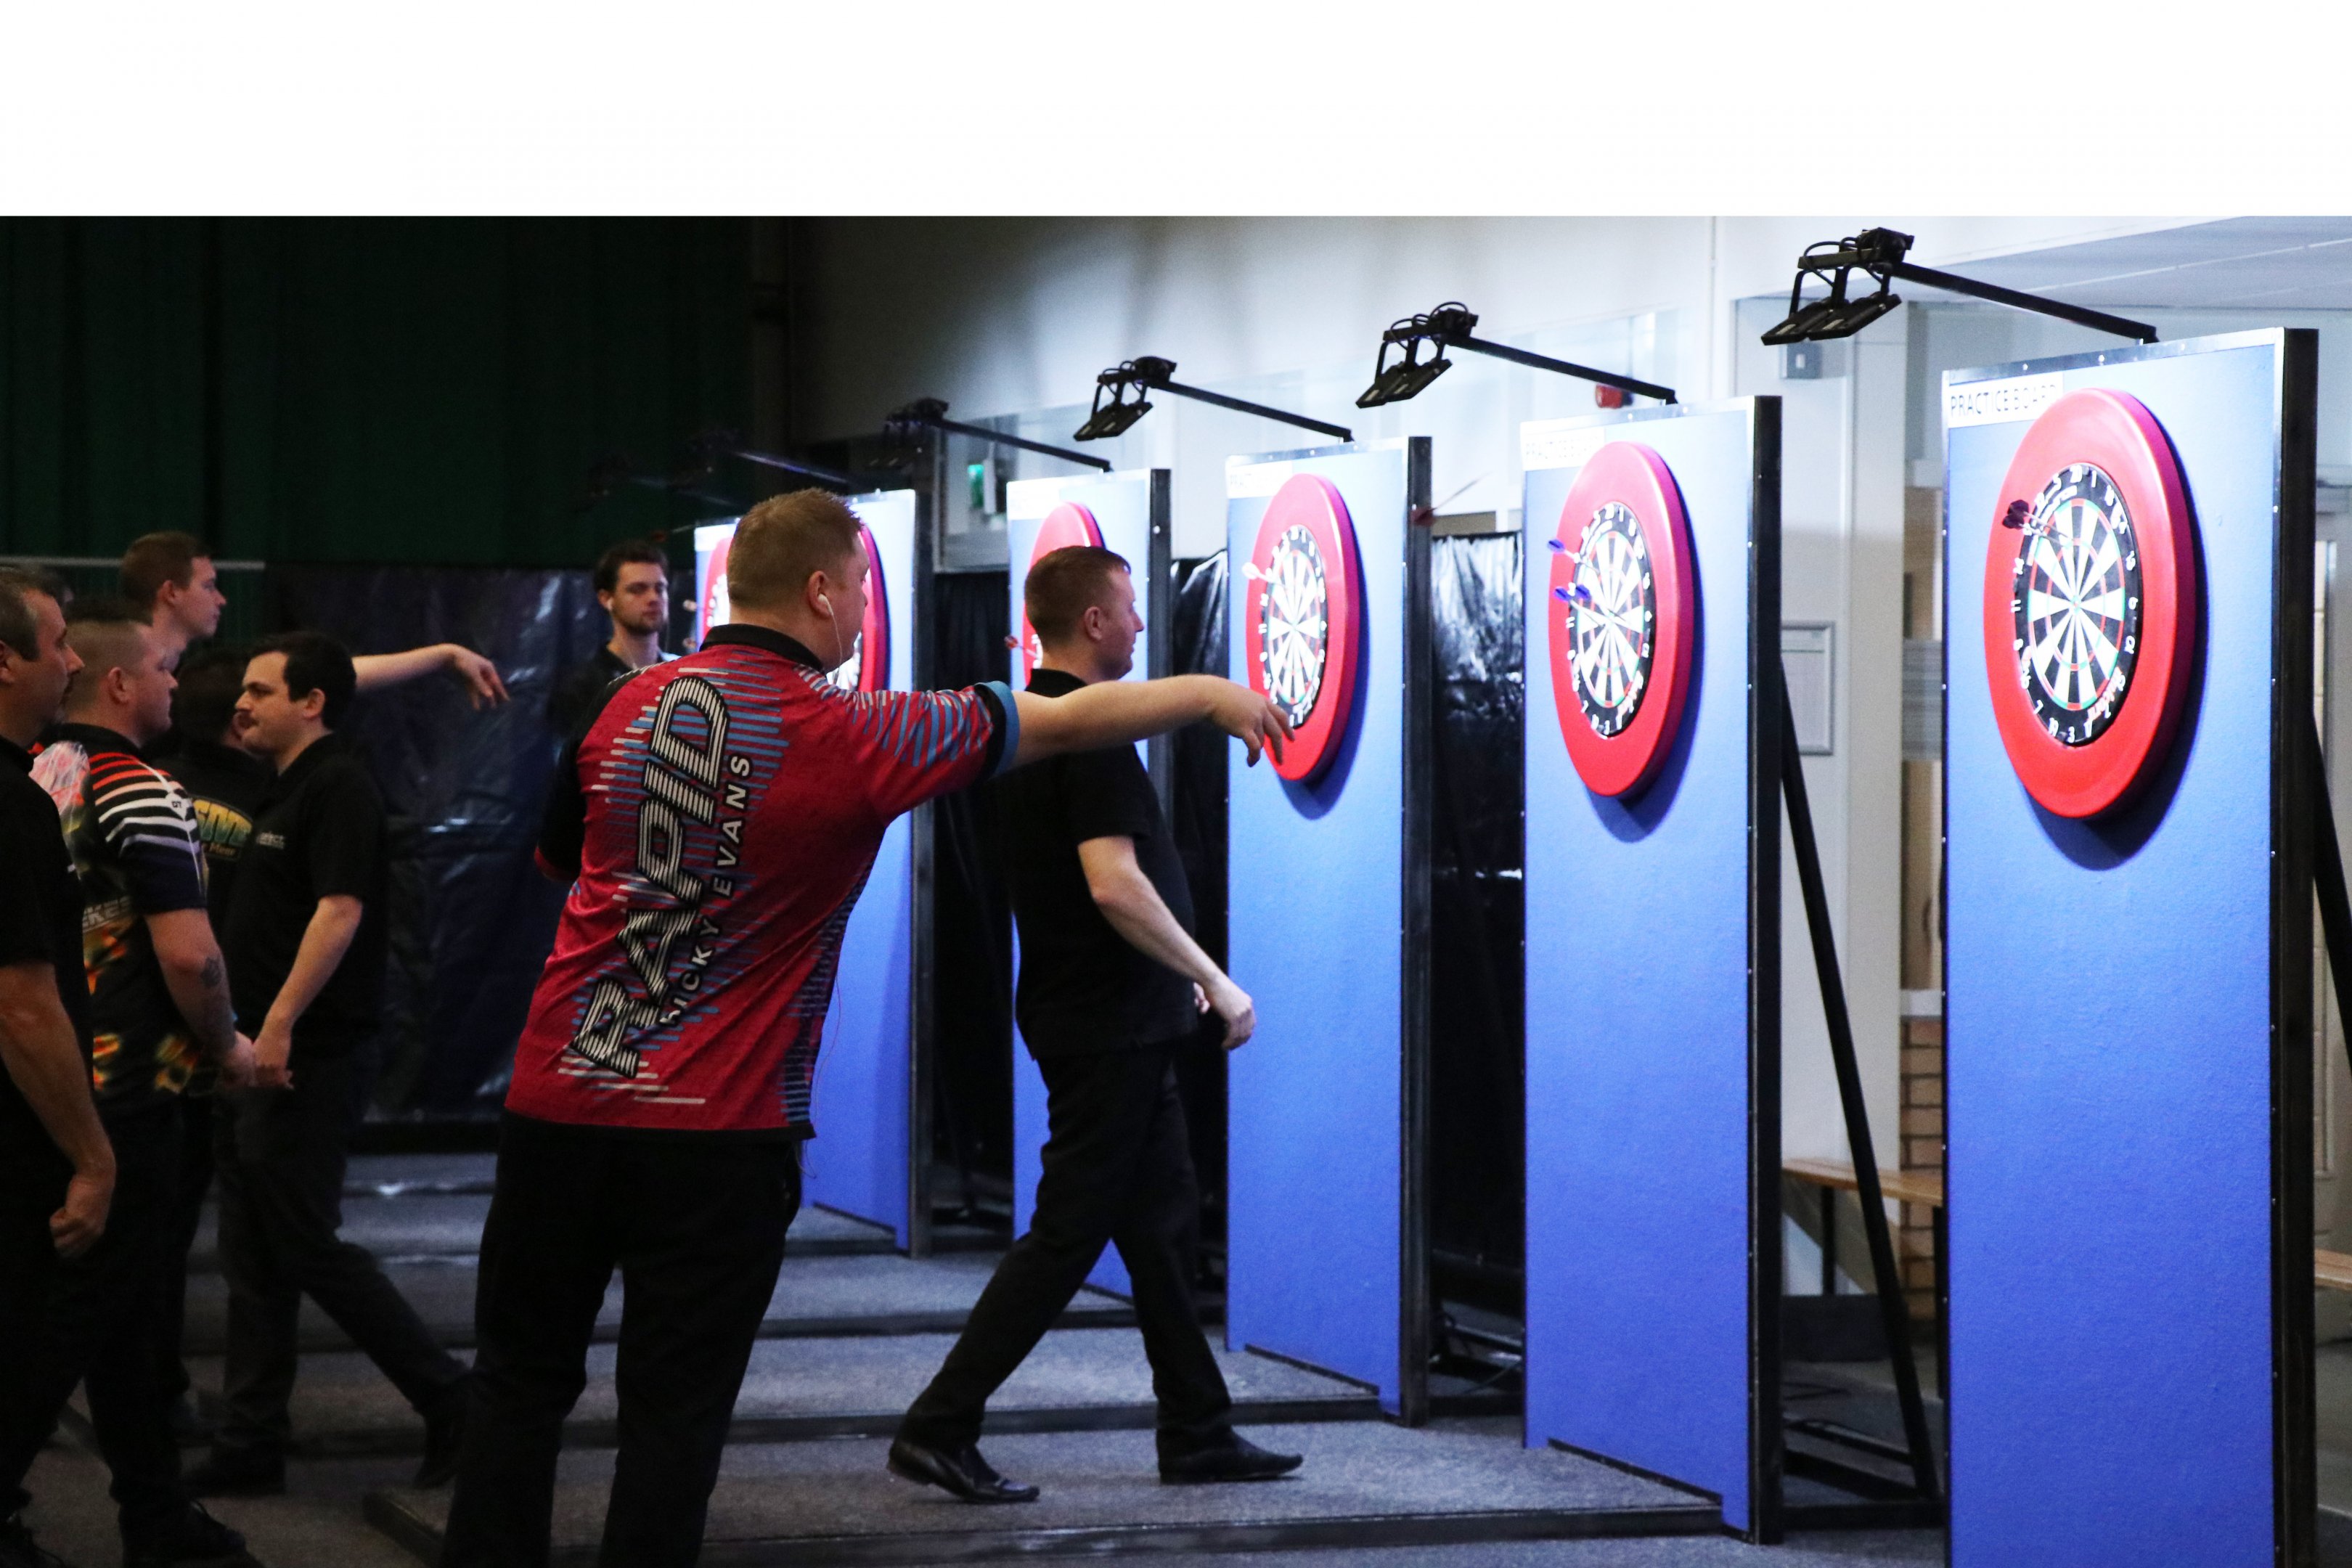 Player entries confirmed for PDC Autumn Series & World Series of Darts